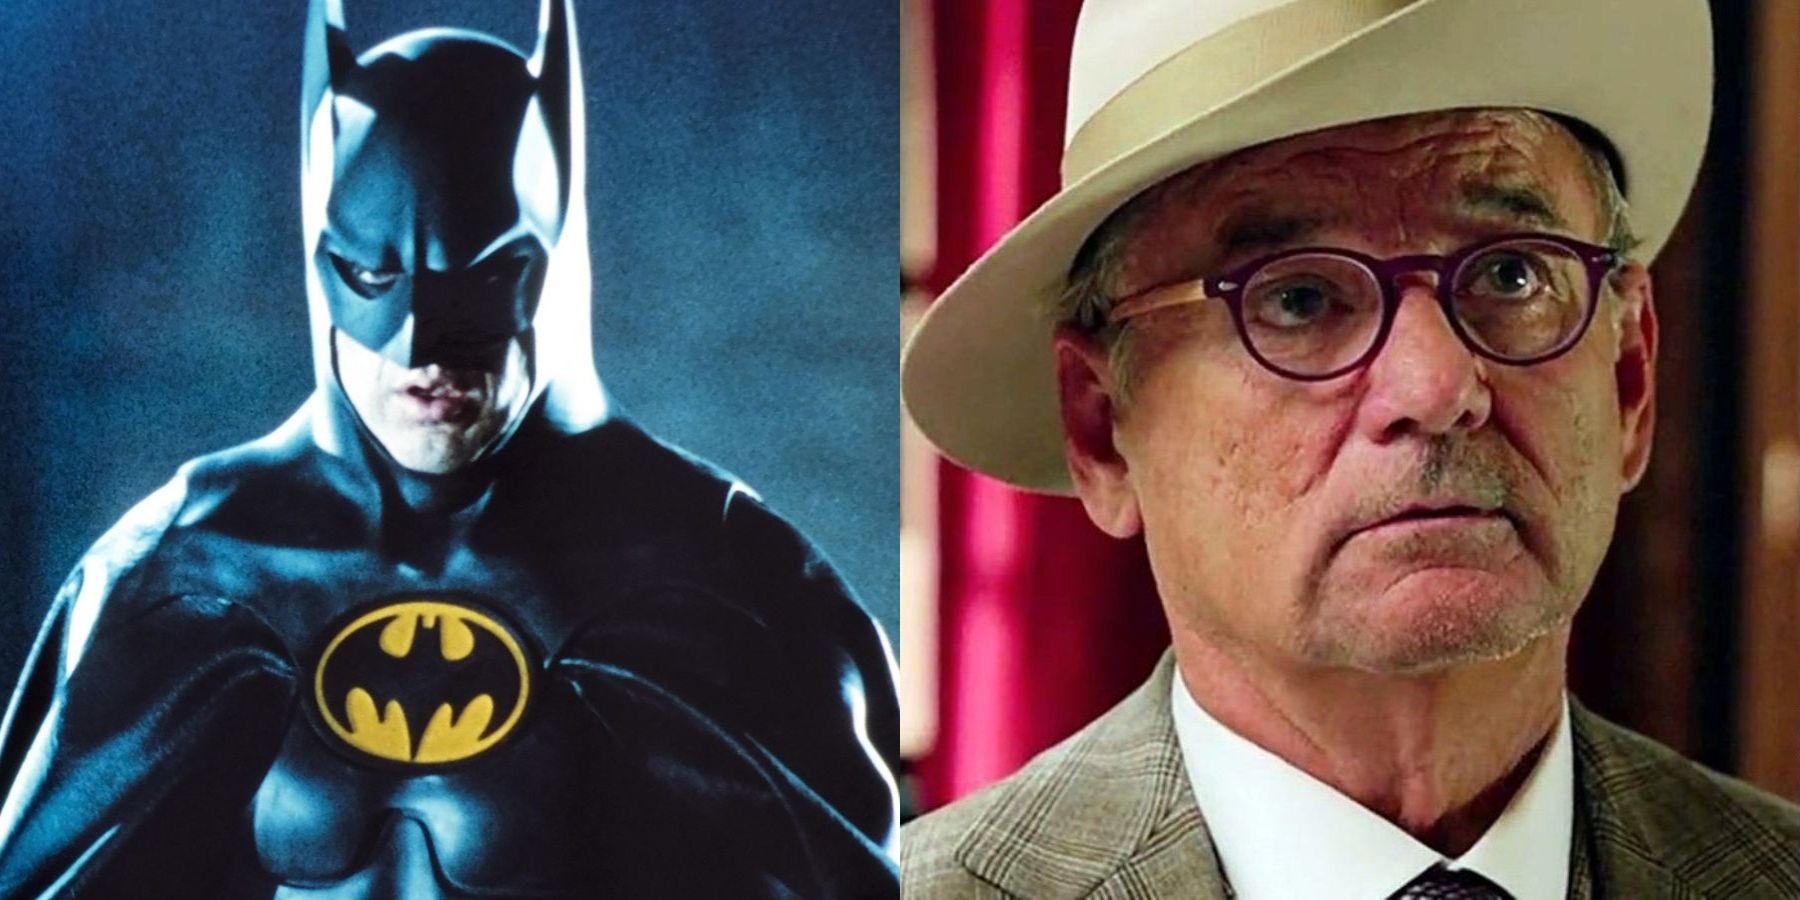 The Late Ivan Reitman Planned a Batman Movie With Bill Murray Tipped To Star